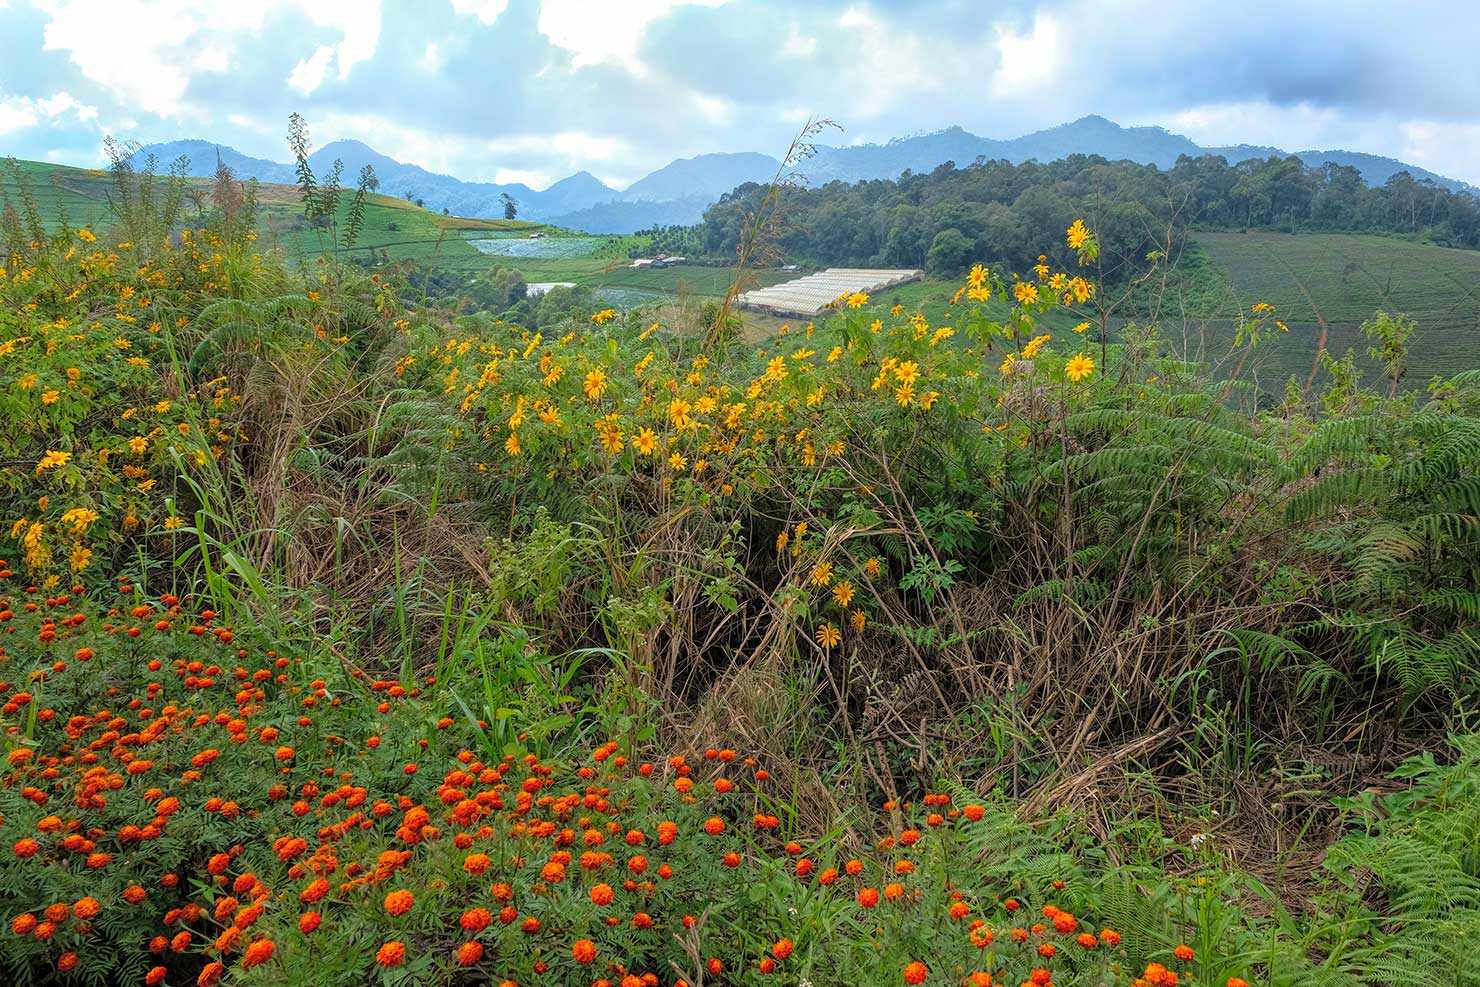 Marigolds and other wildflowers mingle with sunflowers on the shoulder of the road